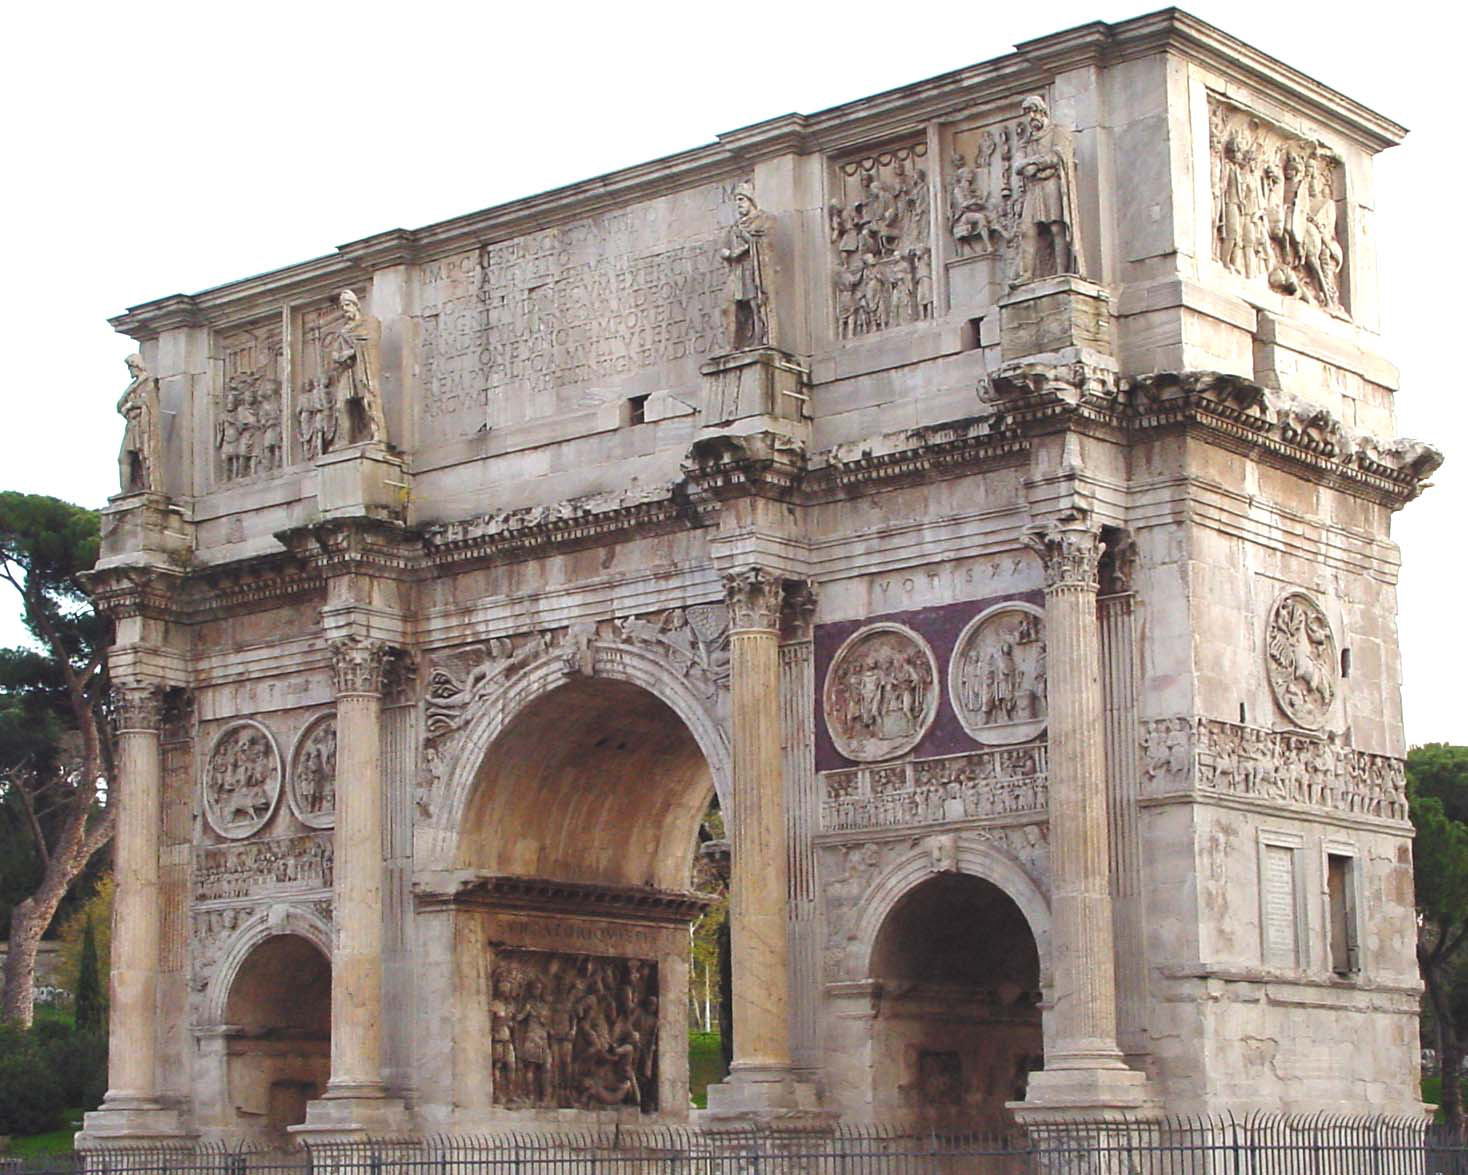 The Arch of Constantine is completed near the Colosseum at Rome to commemorate Constantine's victory over Maxentius at the Milvian Bridge